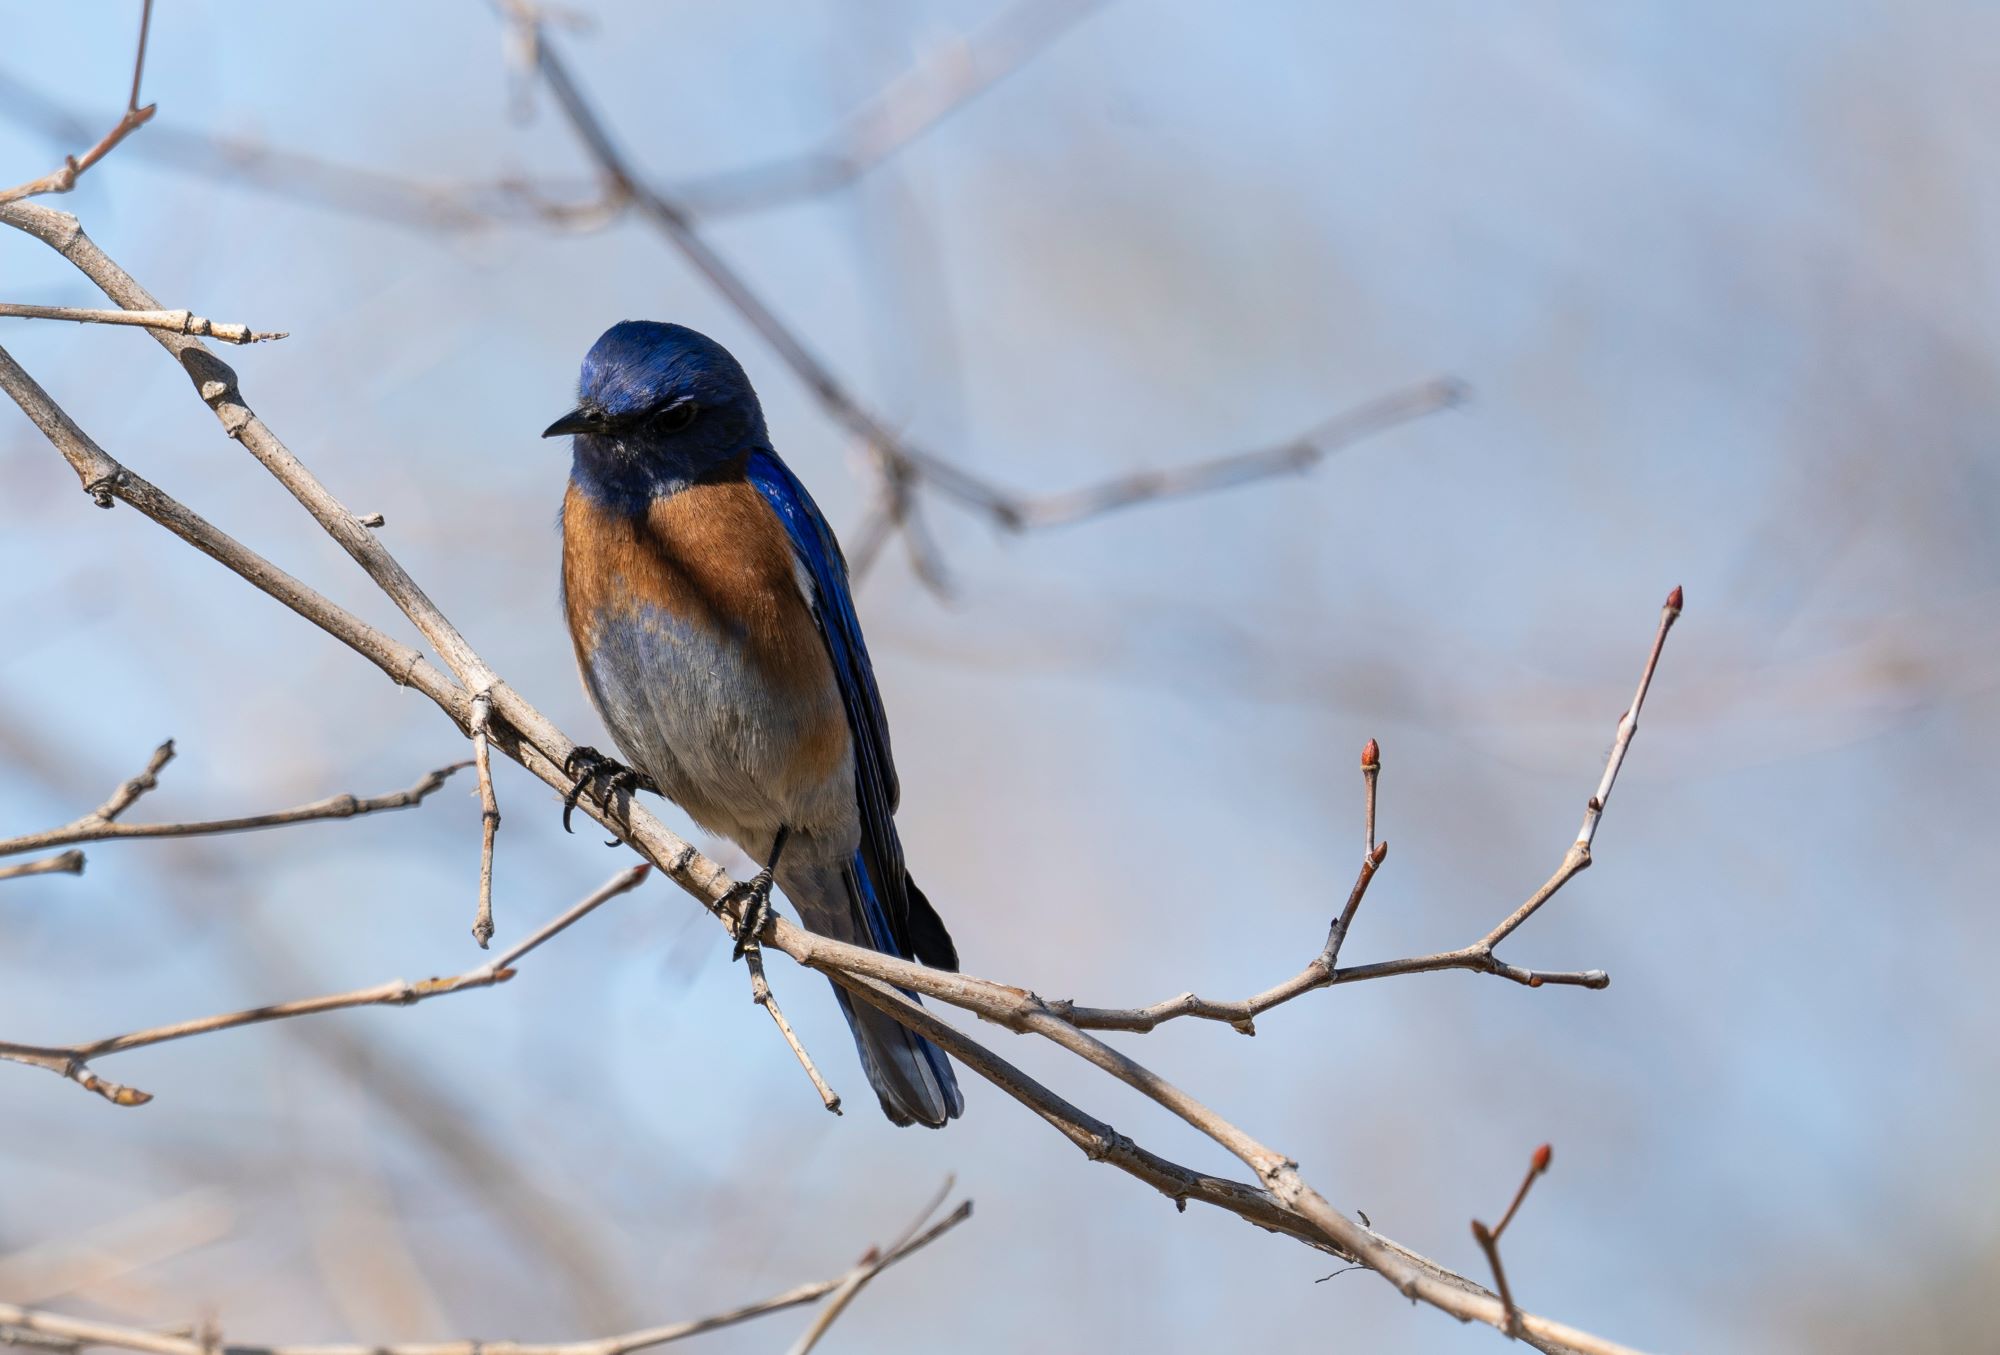 A Western Bluebird perches on a bare tree branch.